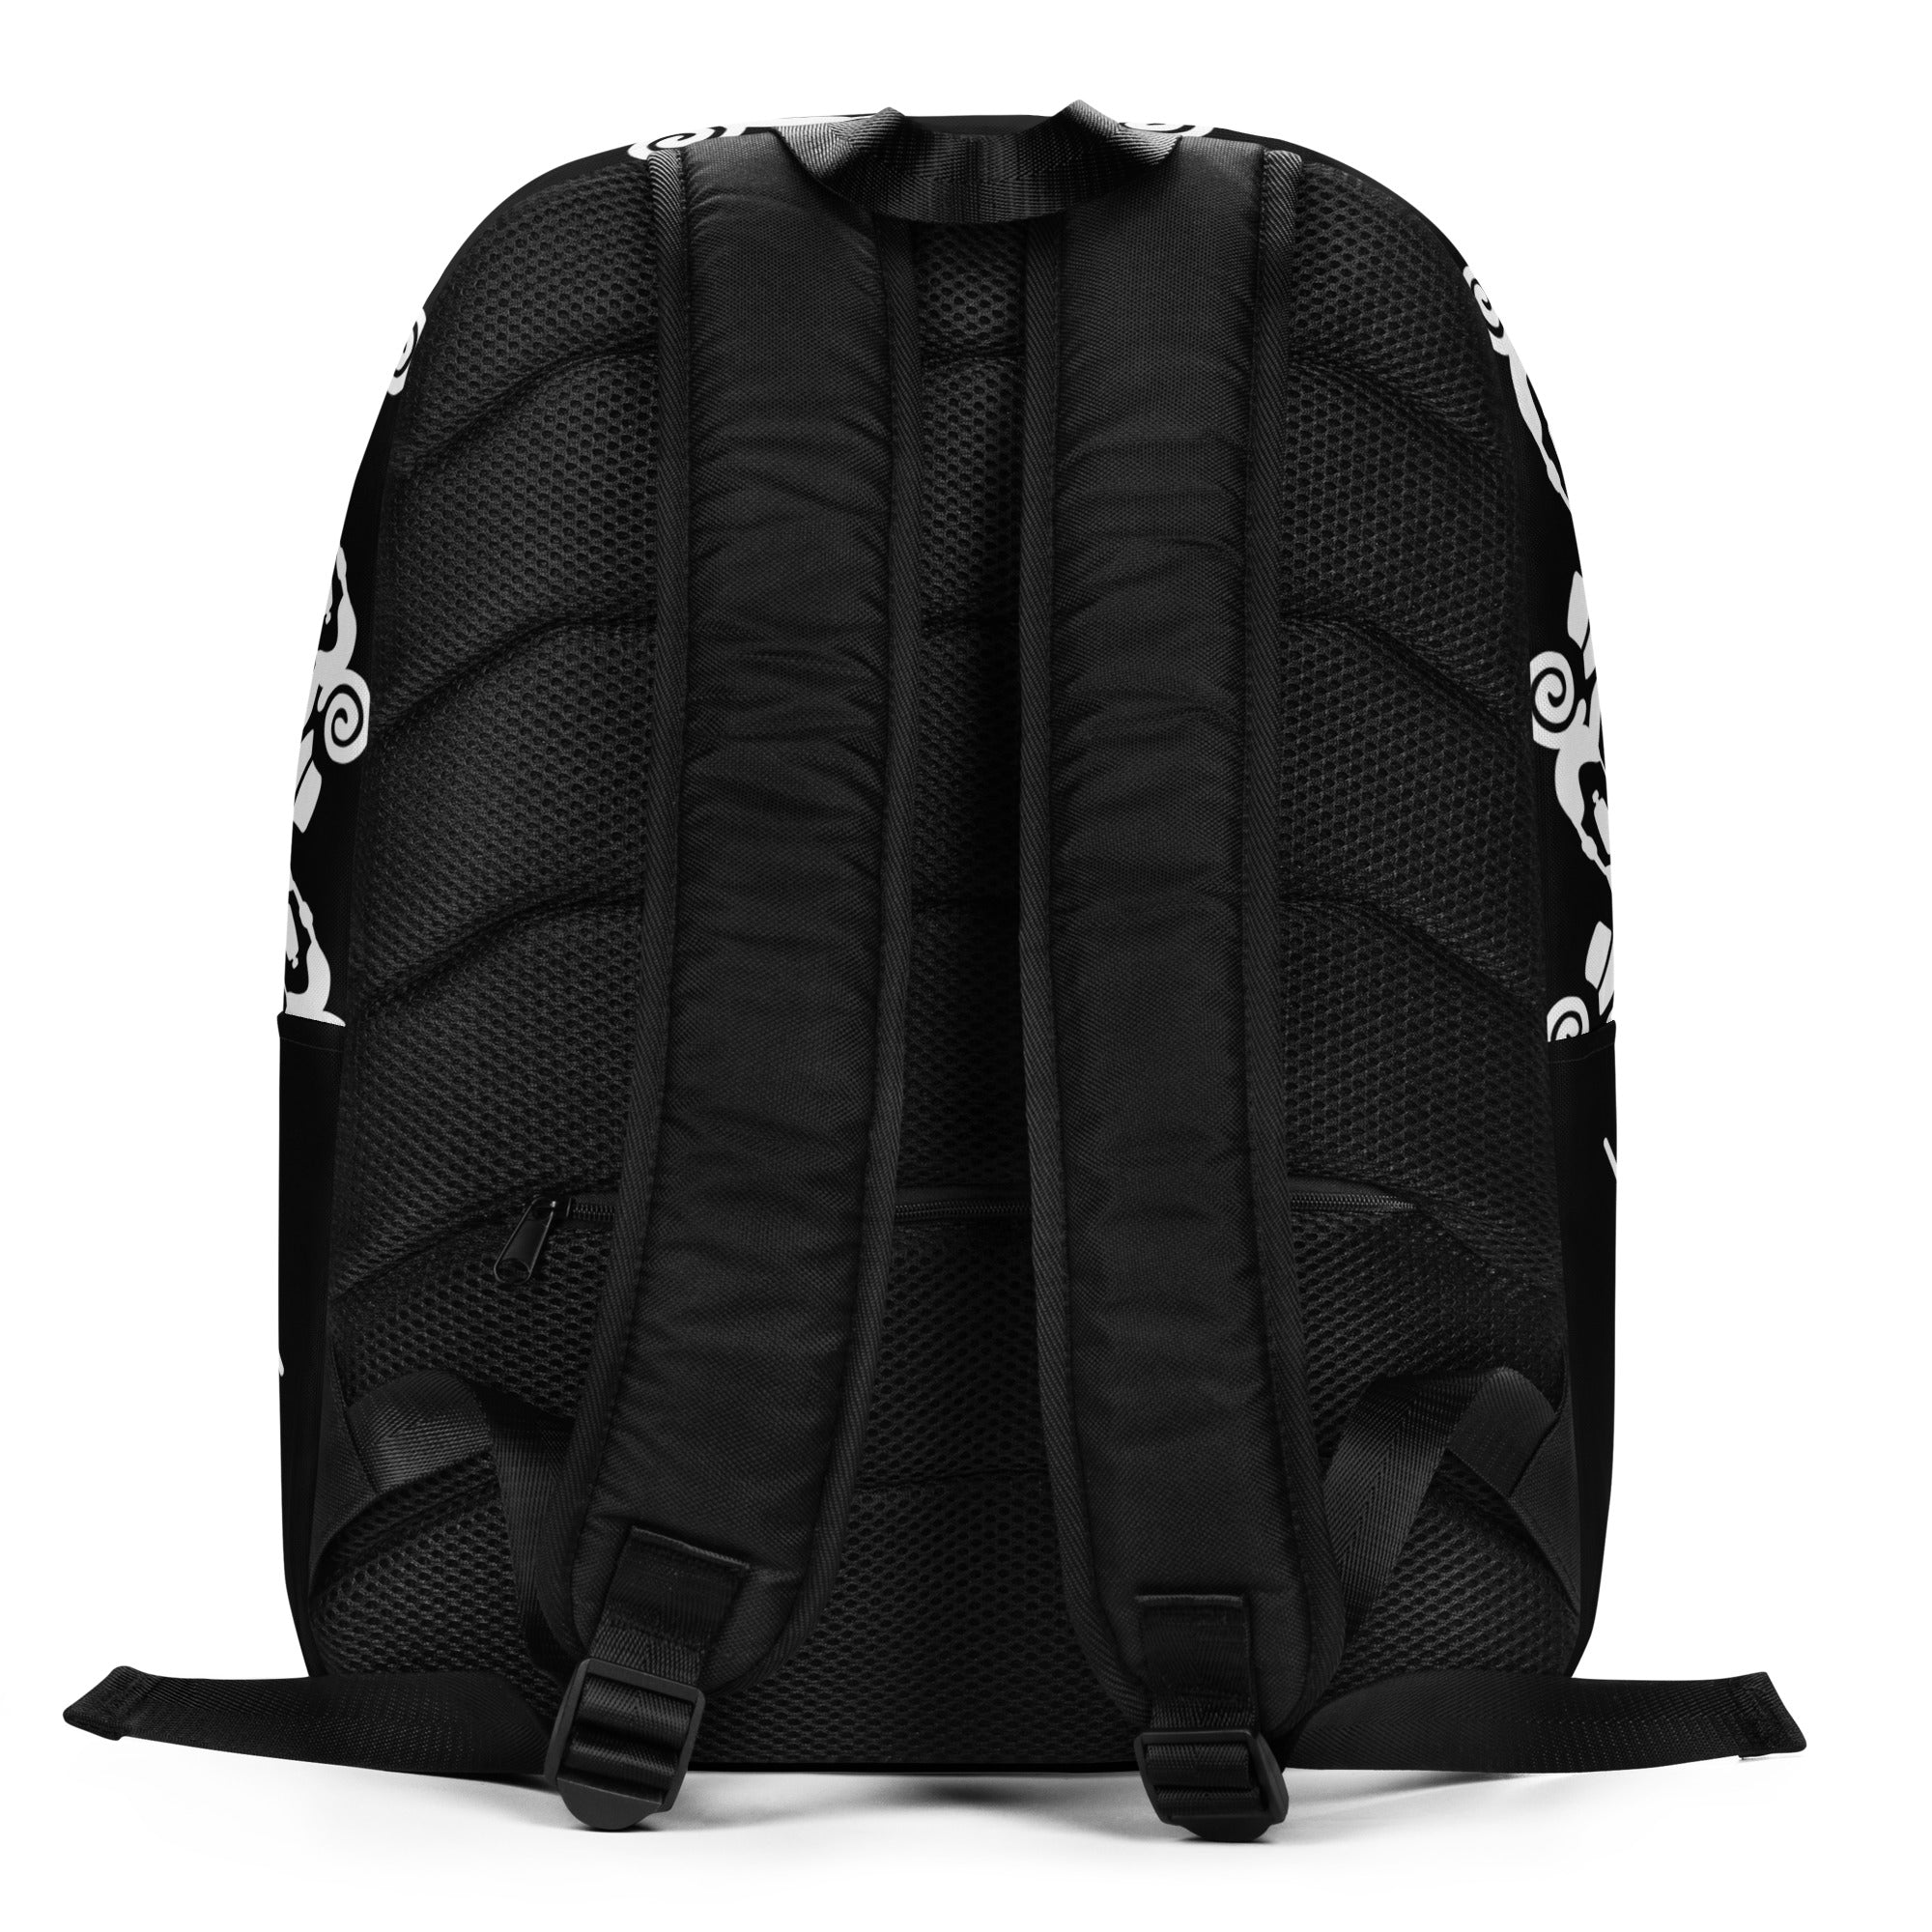 Off to great places #StandOut Minimalist Backpack